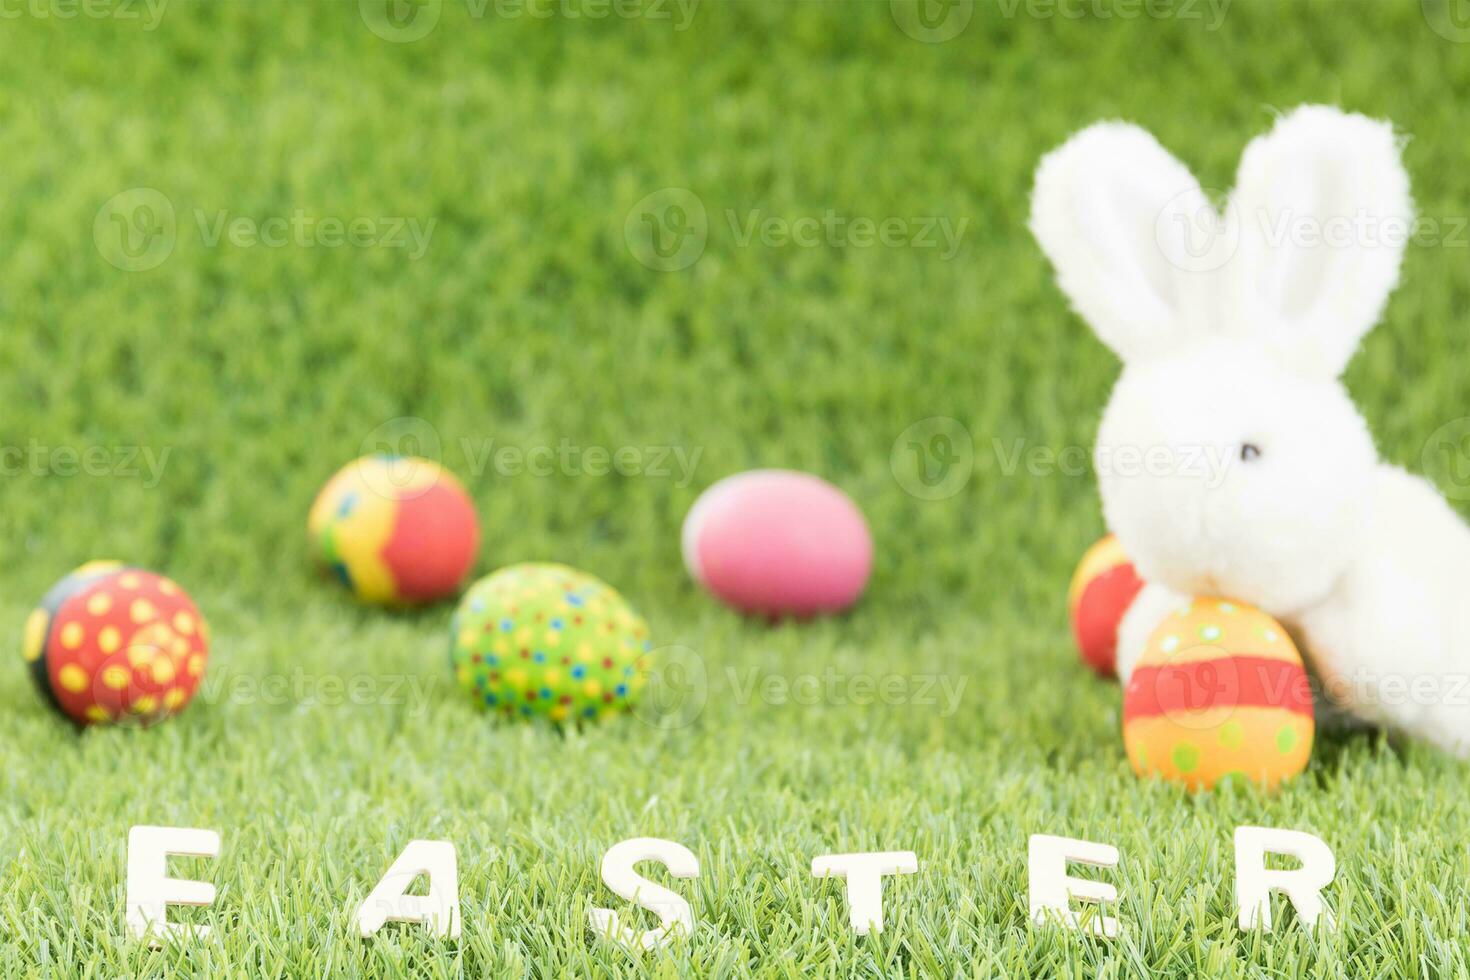 Bunny toys and Easter eggs with text photo